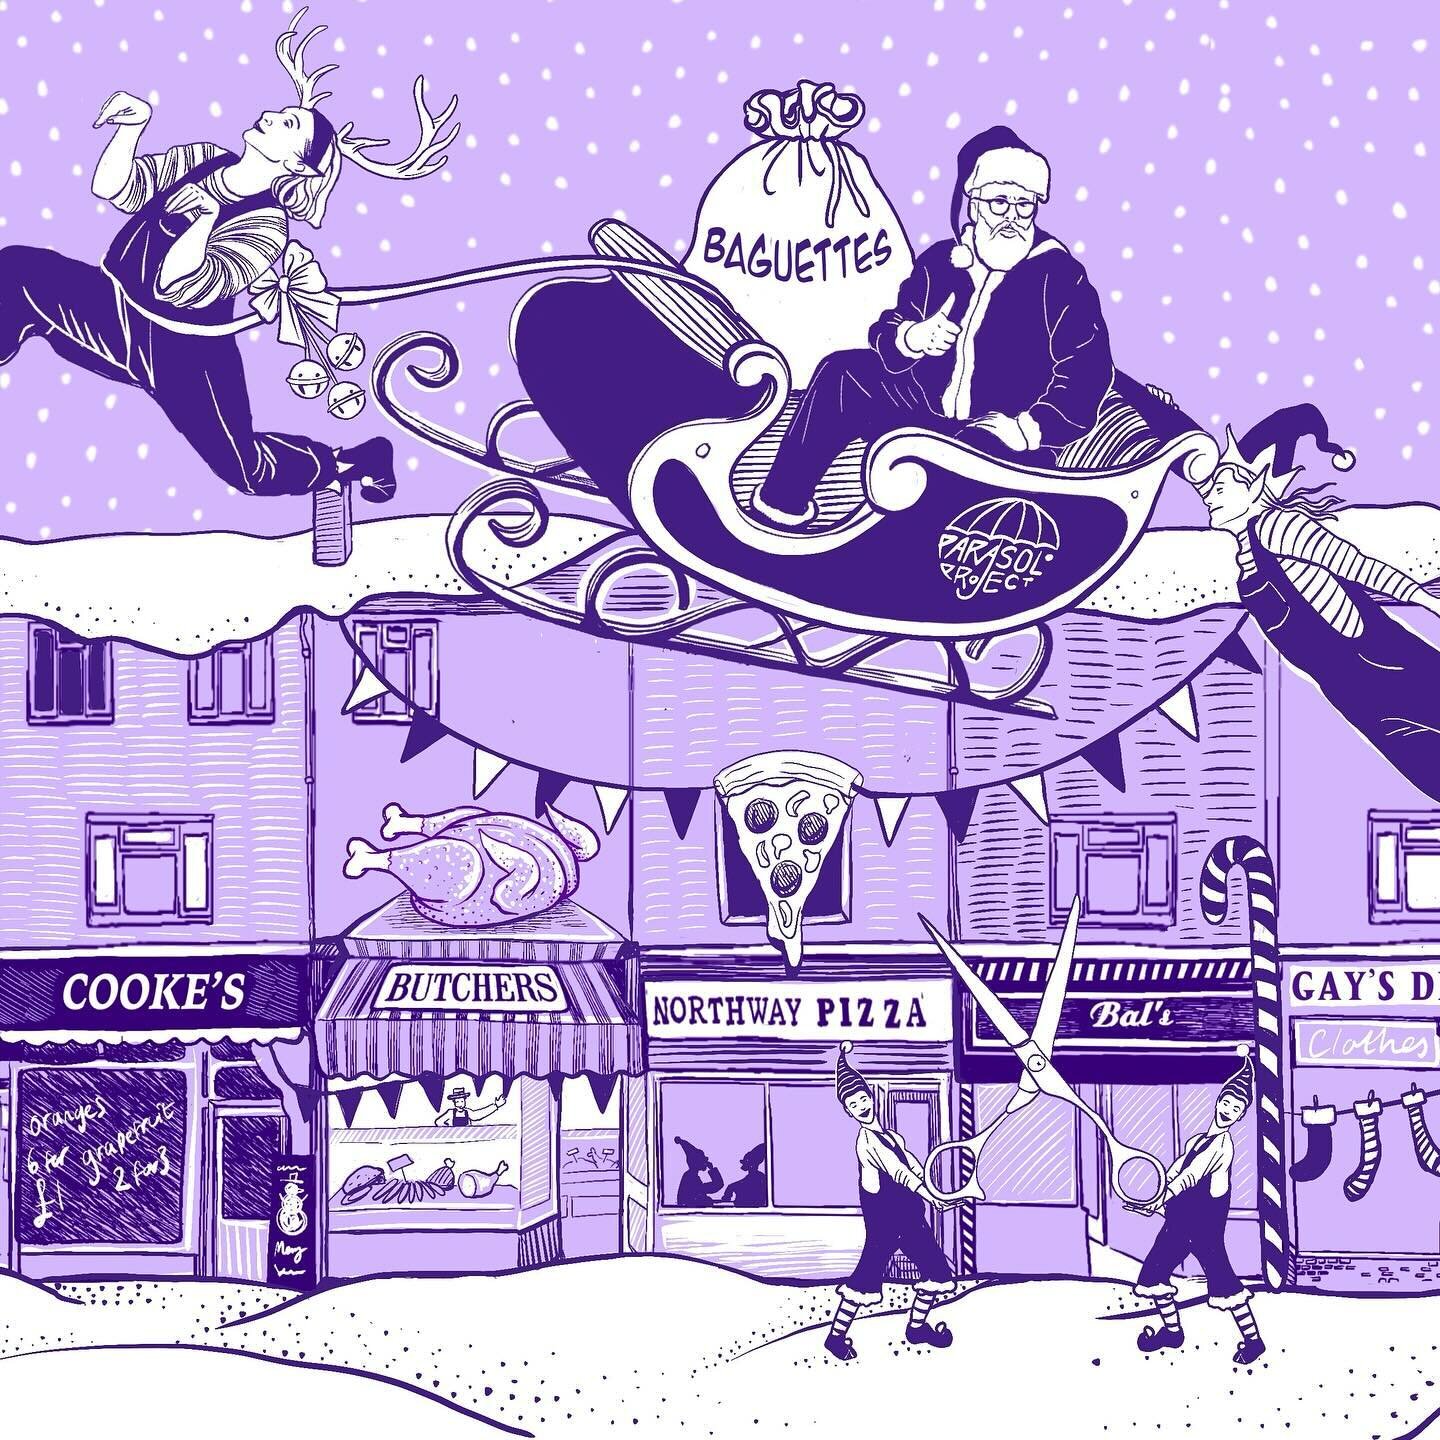 Here are some stories behind the Christmas card designs I illustrated for Festive Throwbacks-with inspiration from Frank, Pat and Pam of Northway as well as Amani, Tom, Chris and Cara of Parasol Project.

💜Purple Card: The Northway parade of shops h